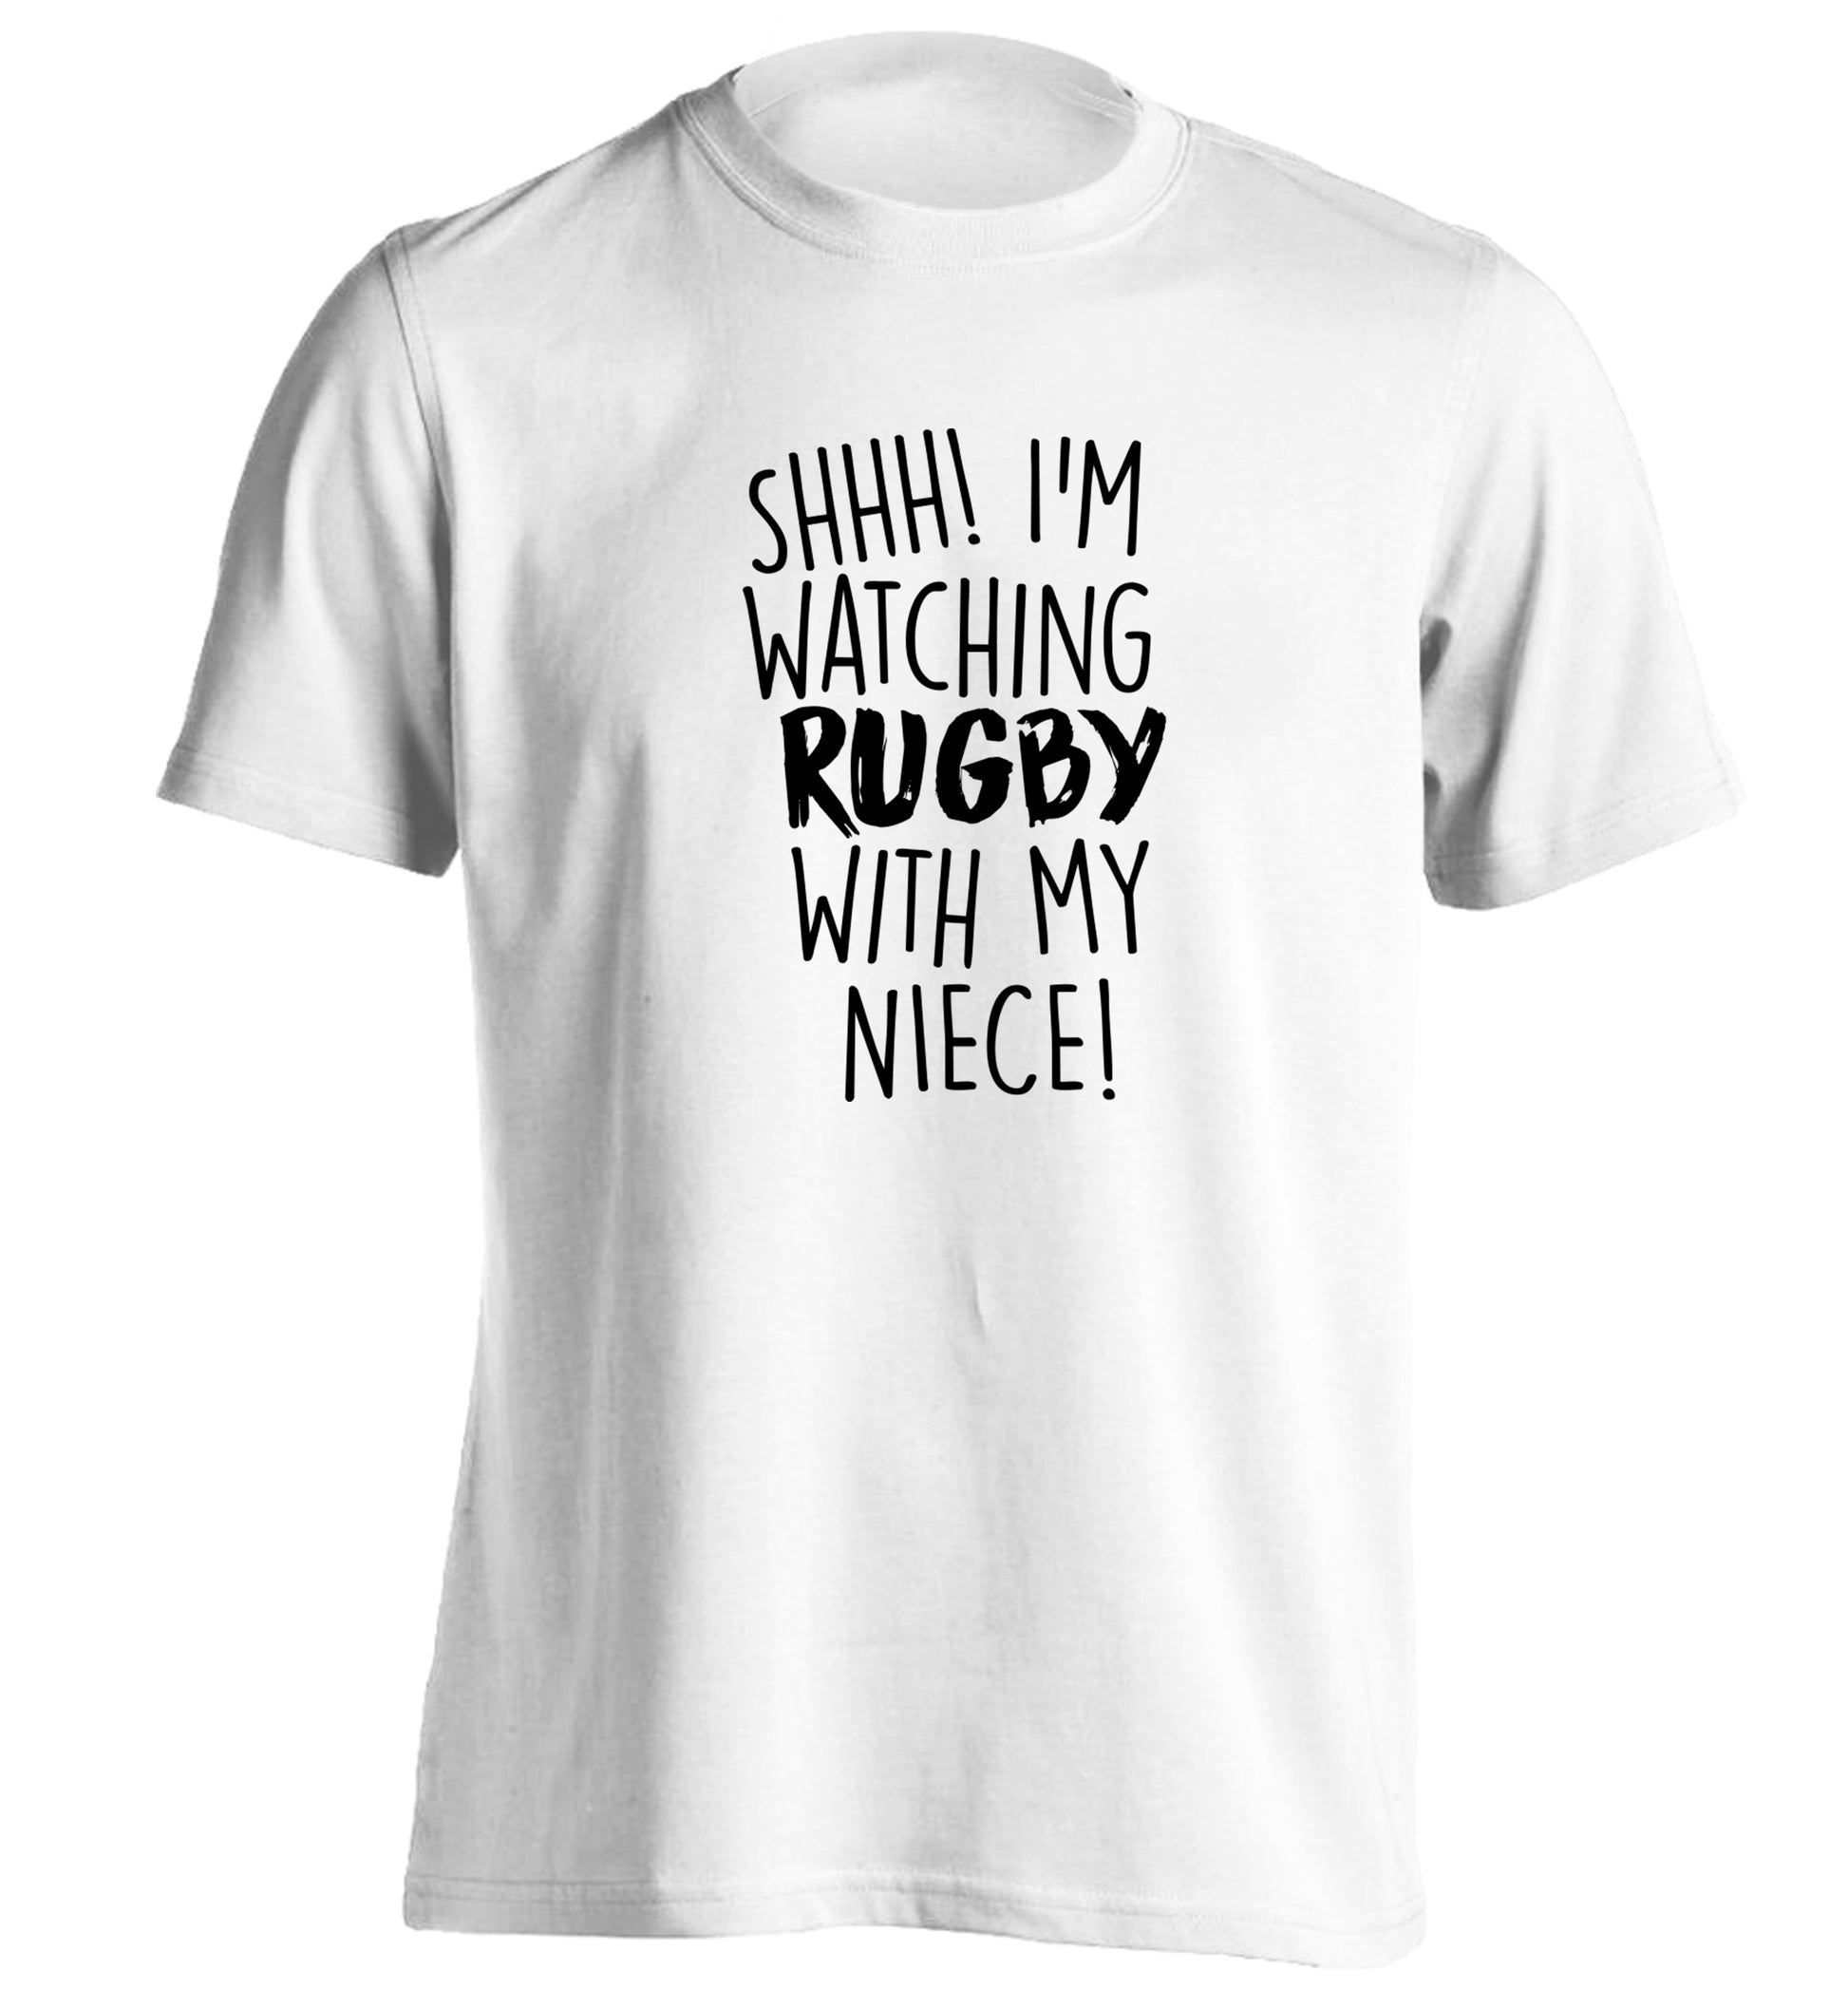 Shh.. I'm watching rugby with my niece adults unisex white Tshirt 2XL